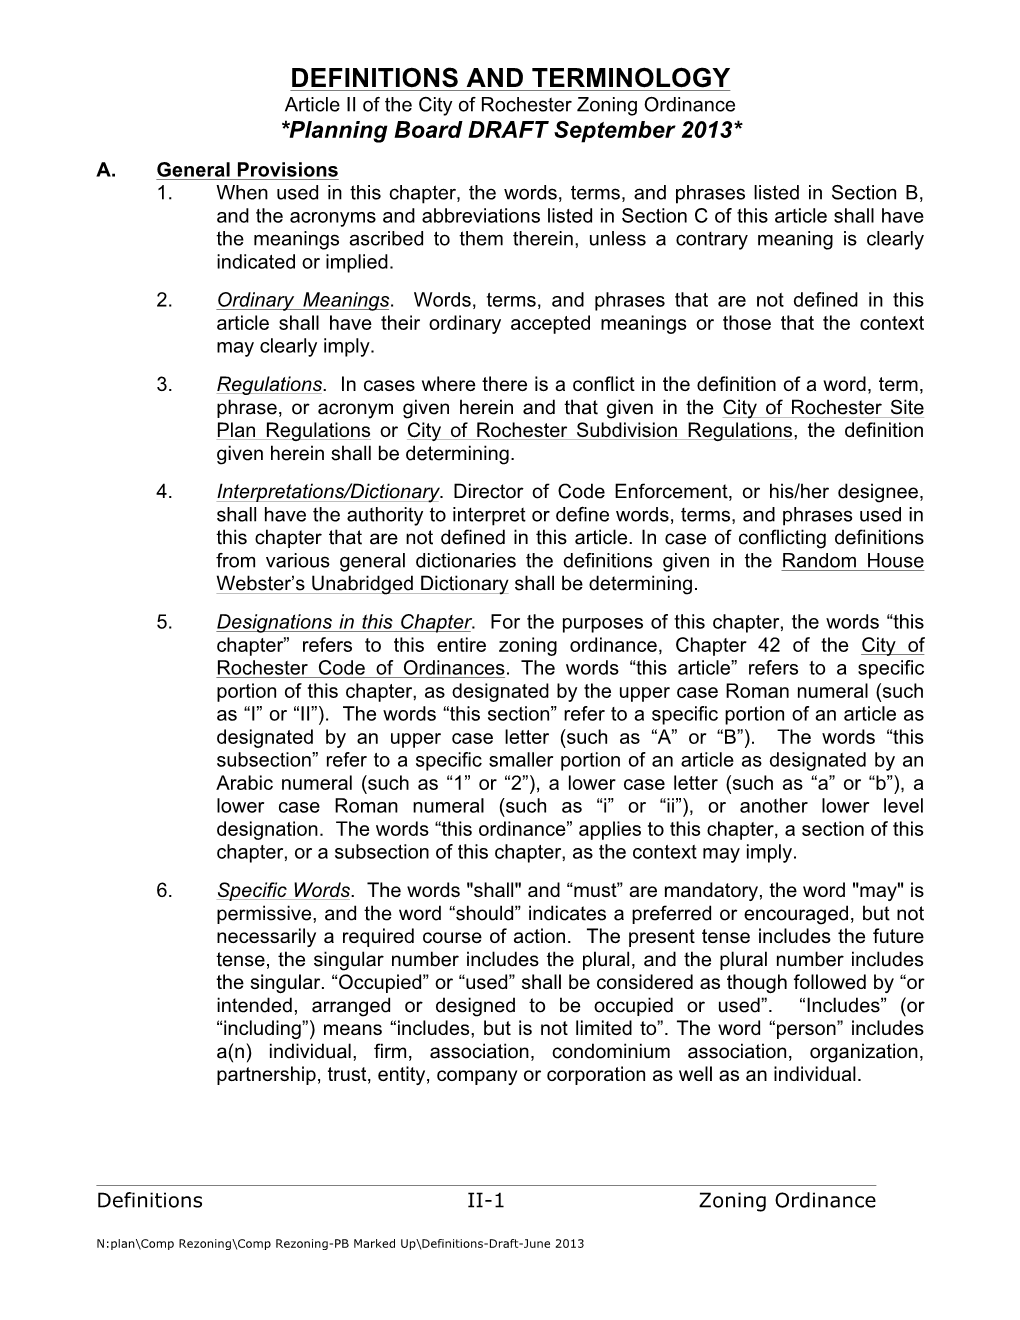 DEFINITIONS and TERMINOLOGY Article II of the City of Rochester Zoning Ordinance *Planning Board DRAFT September 2013*